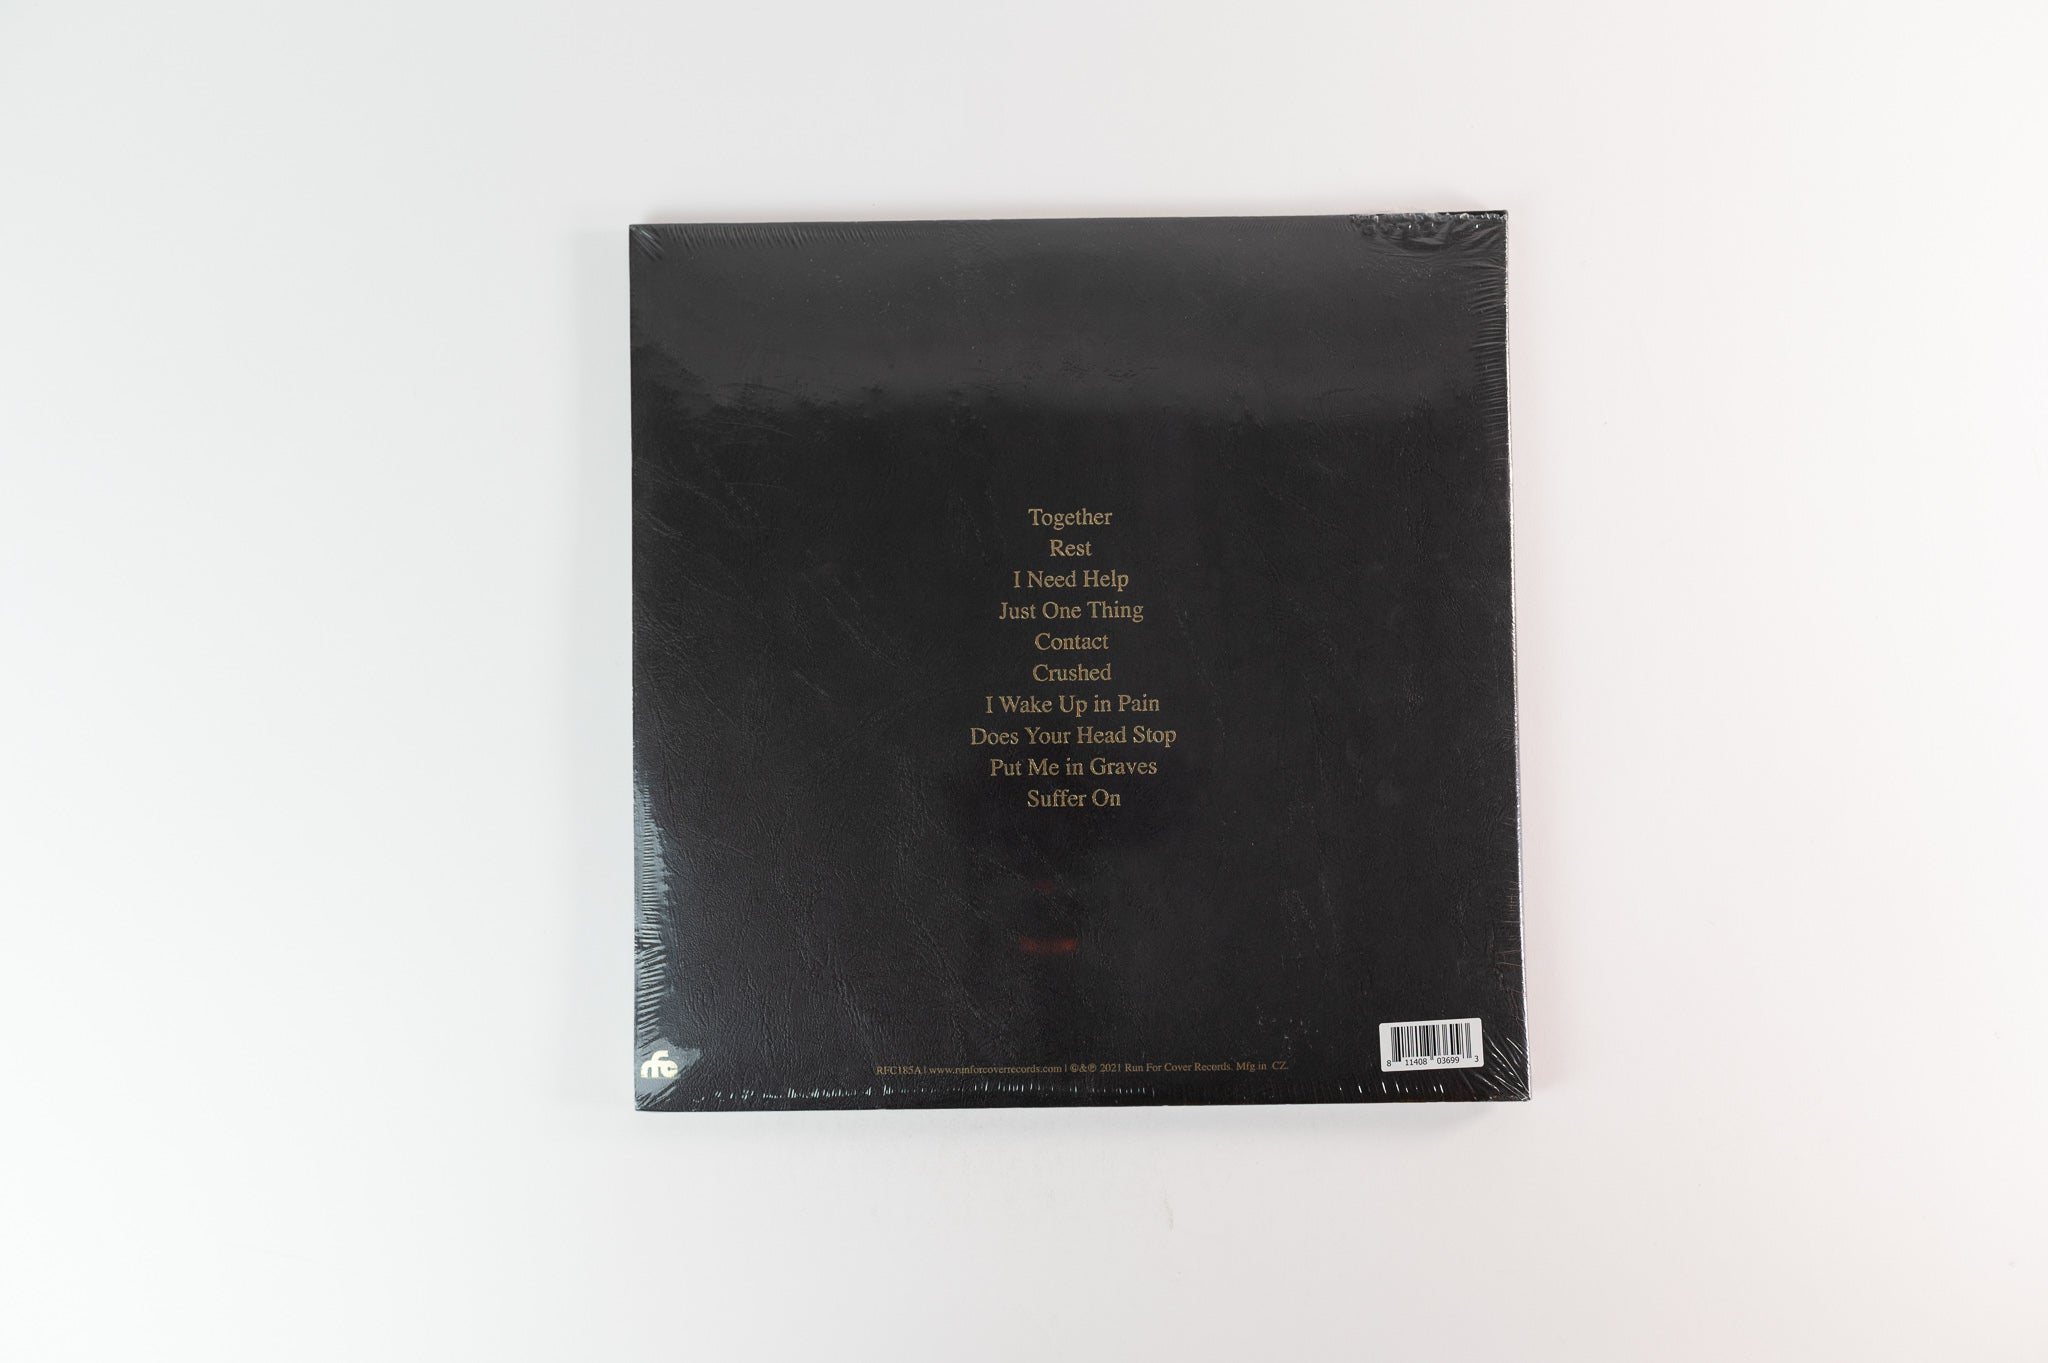 Wicca Phase Springs Eternal - Suffer On Run for Cover Purple & Cream Vinyl Sealed